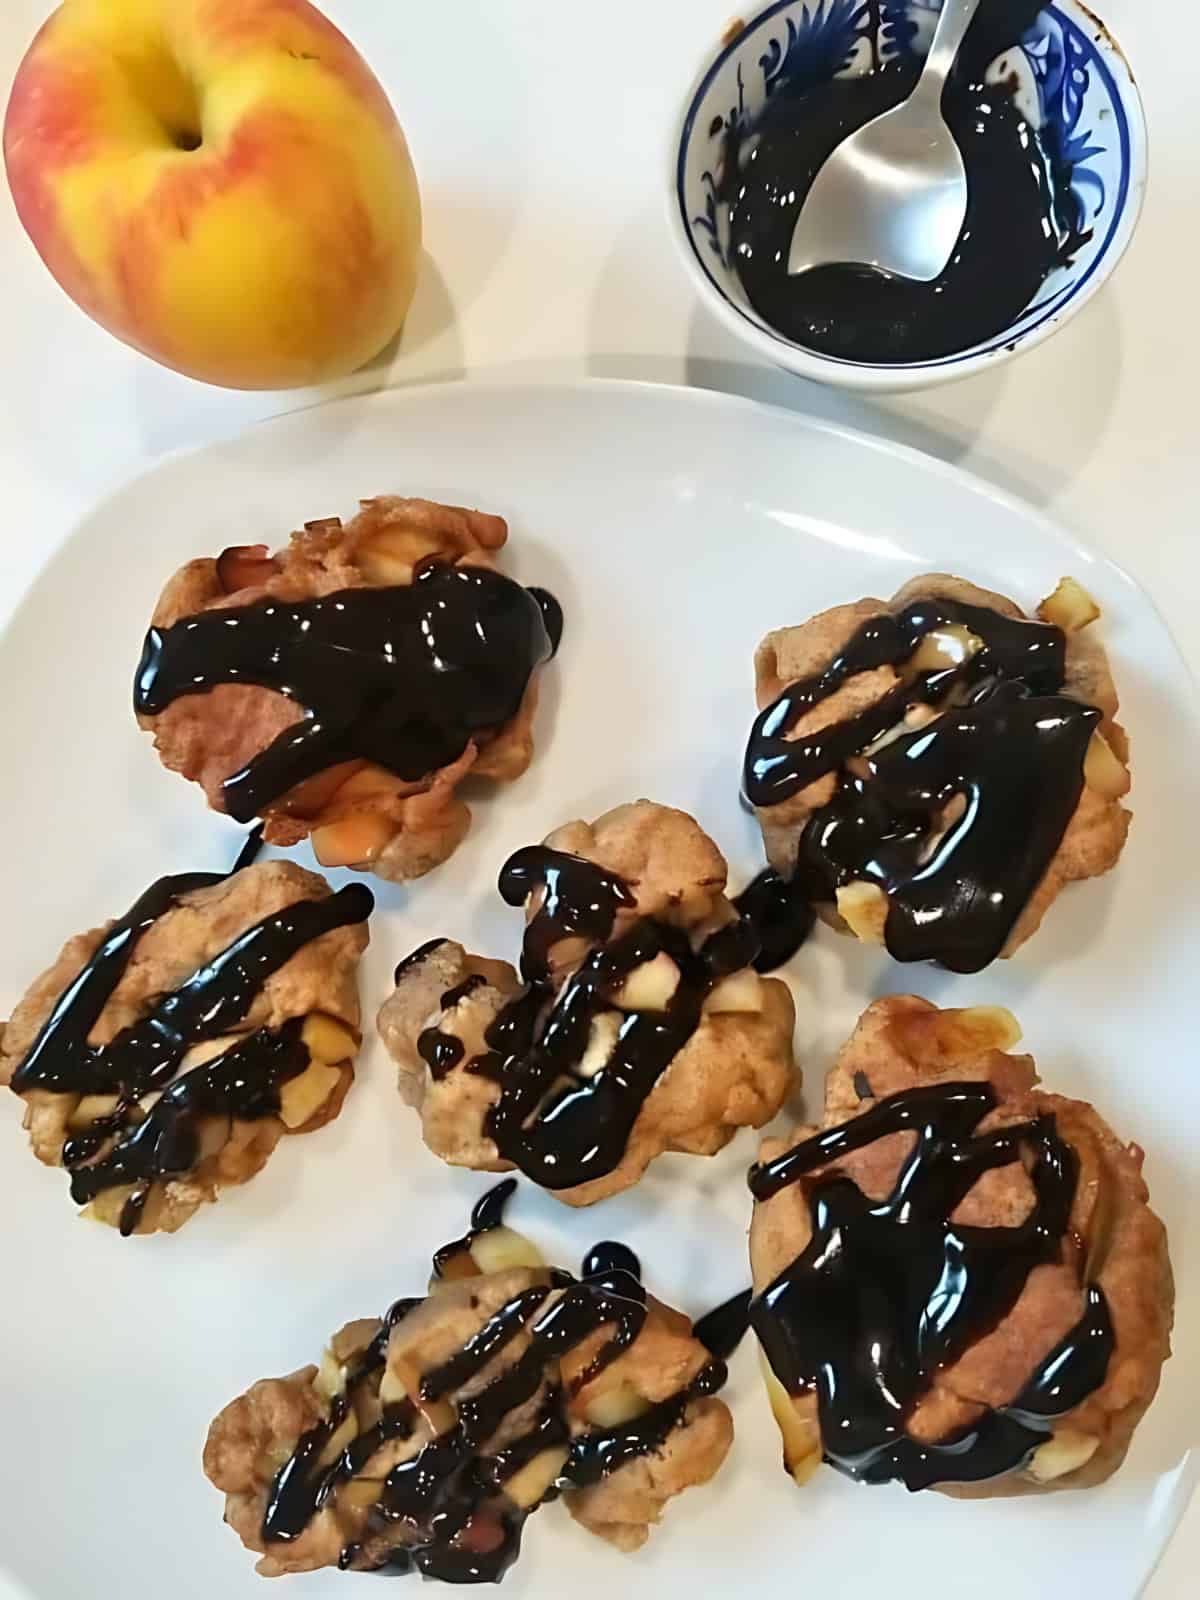 Apple fritters drizzled with chocolate fudge on a plate, next to a fresh apple.